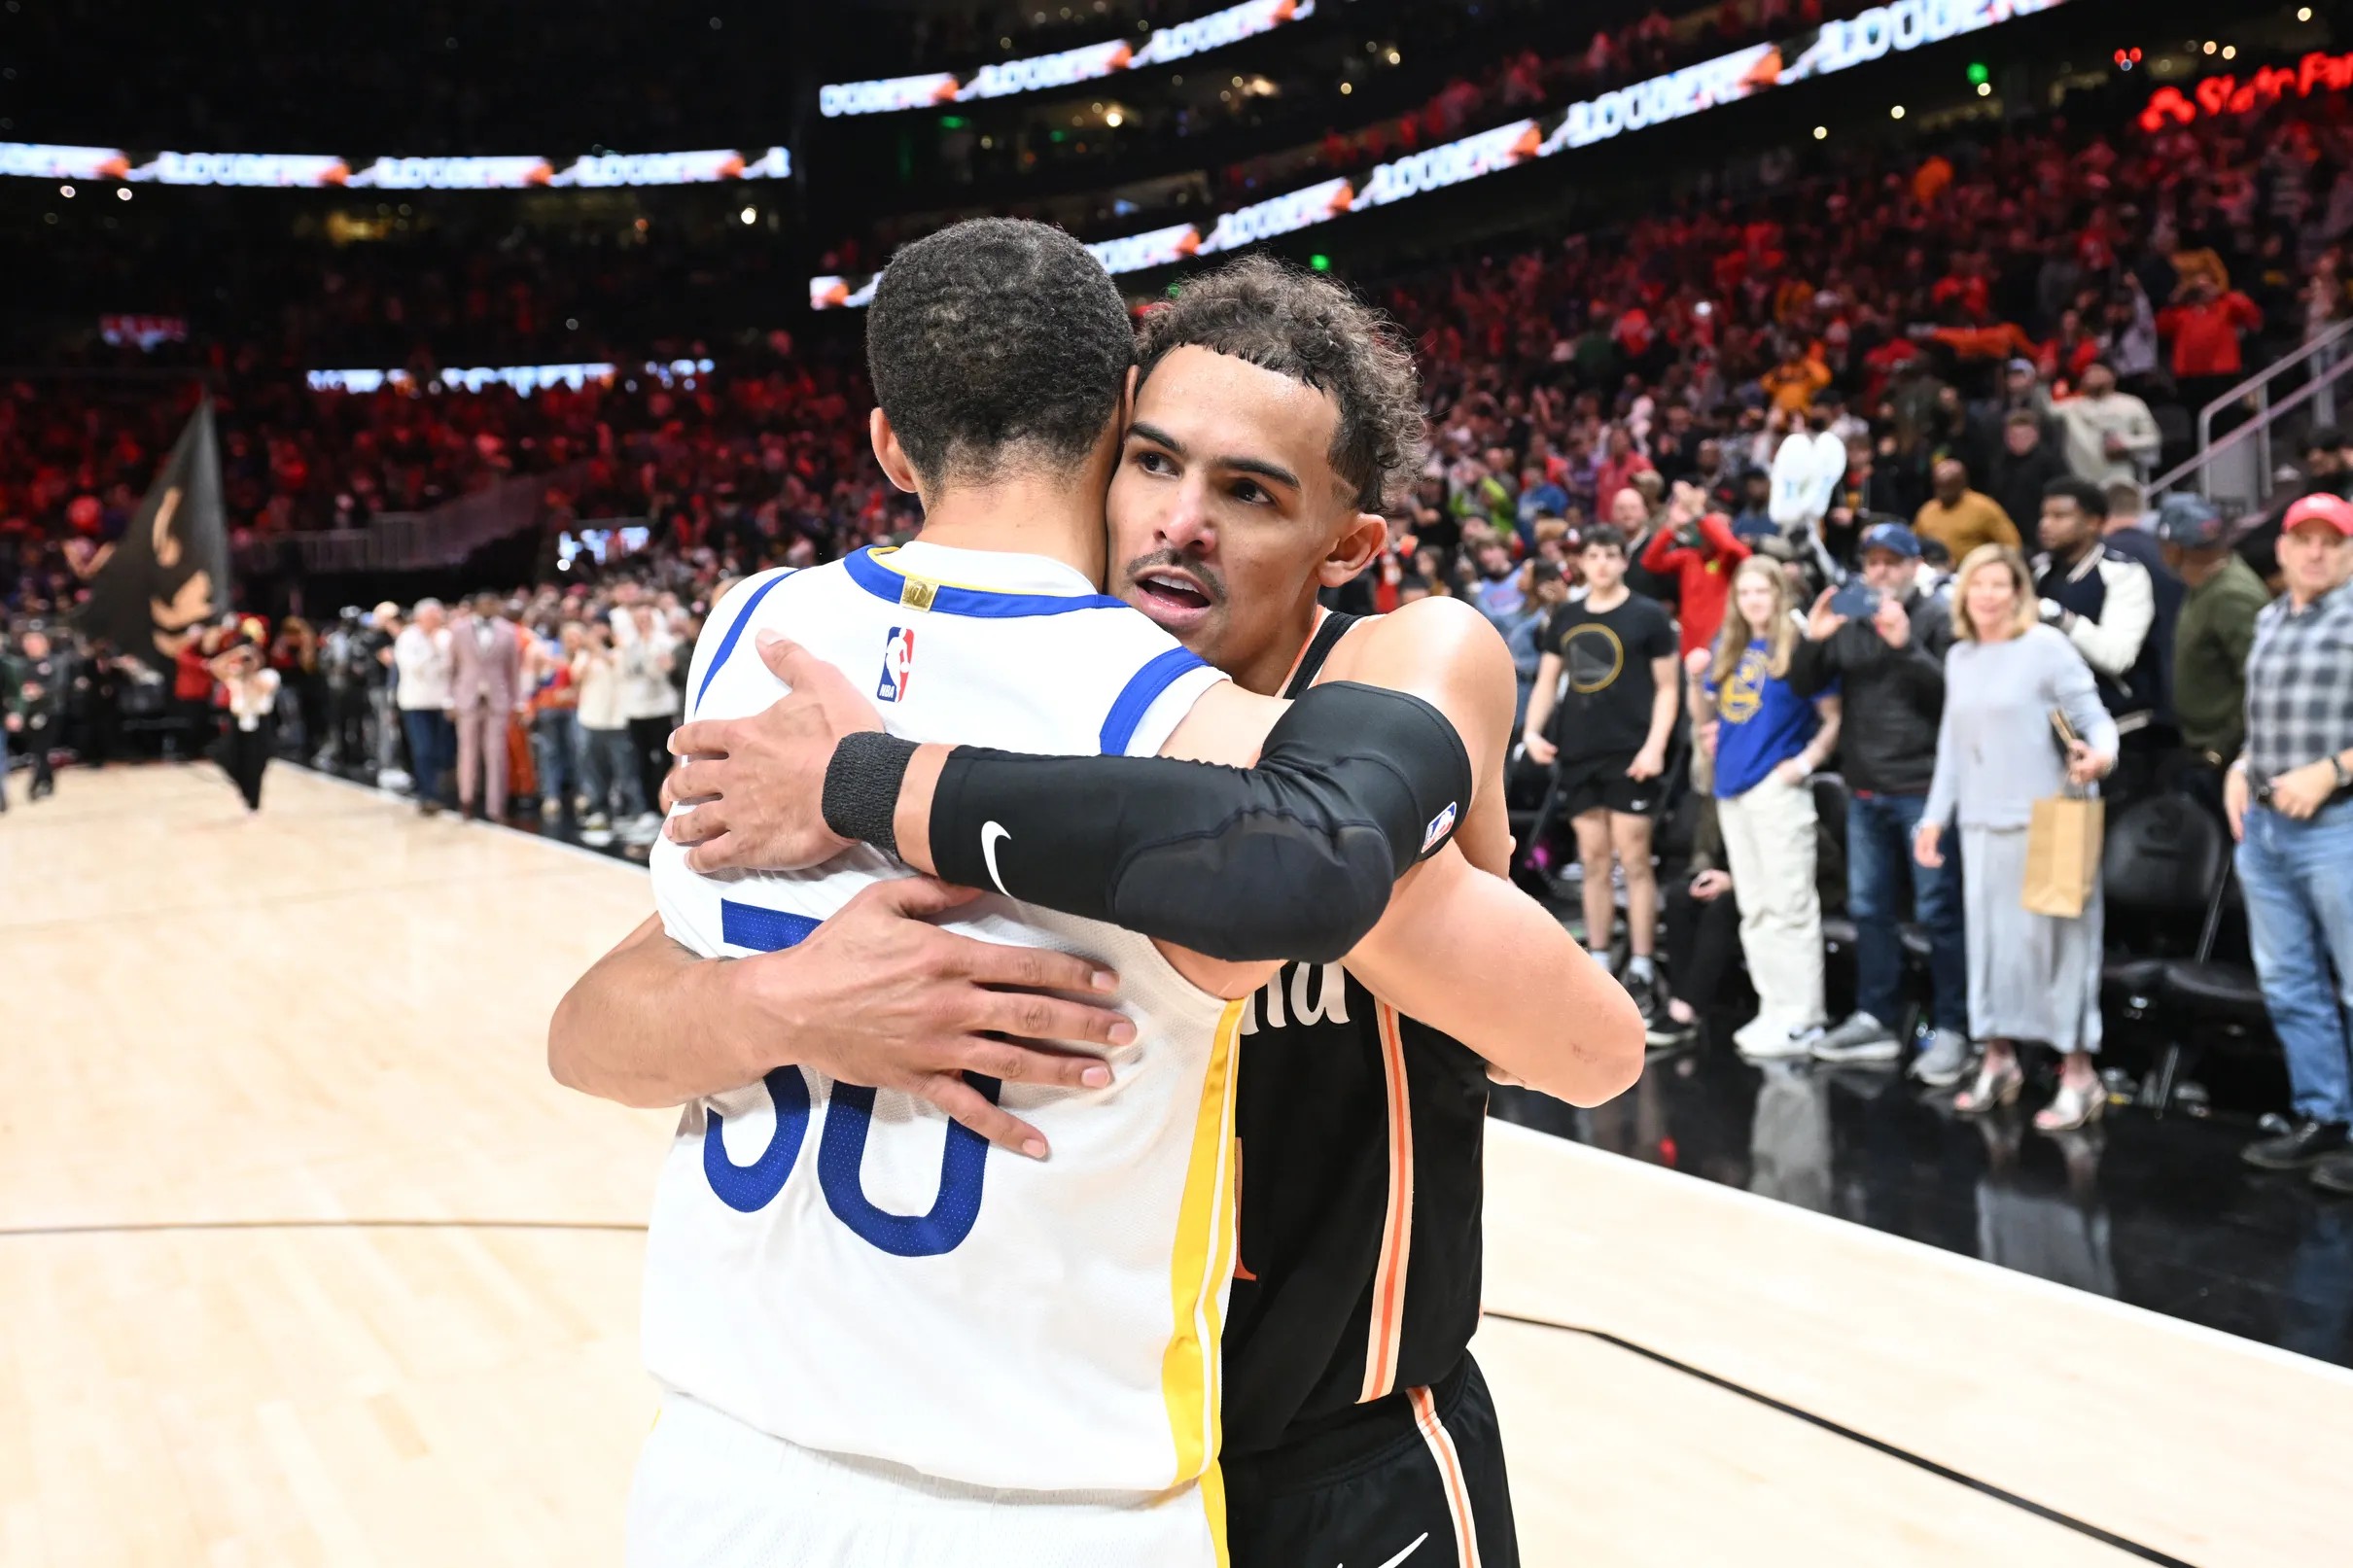 Trae Young works out with Steph Curry — and why that matters